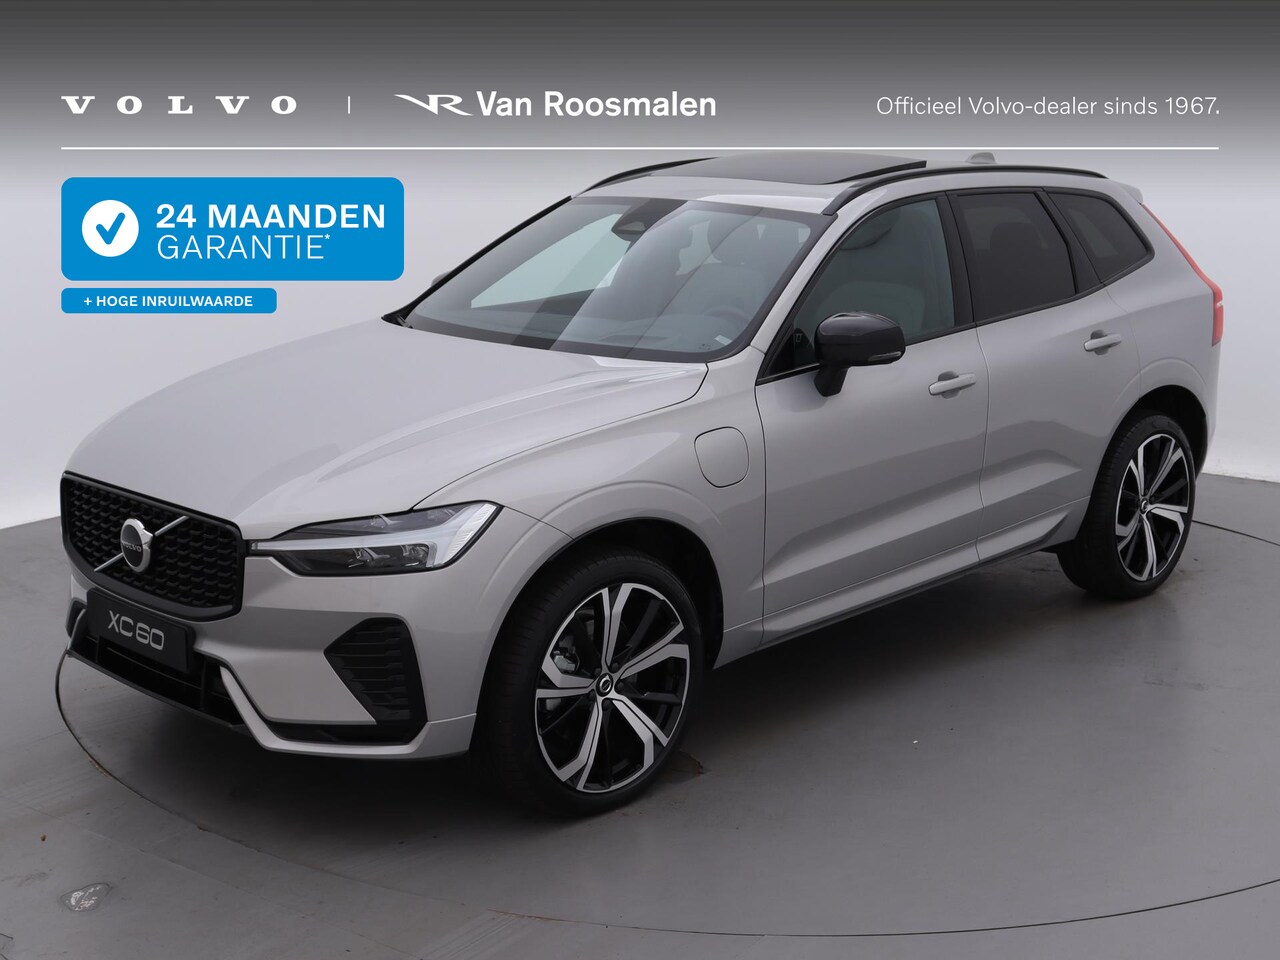 Volvo XC60 - 2.0 Recharge T6 AWD R-Design 2.0 Recharge T6 AWD R-Design - AutoWereld.nl